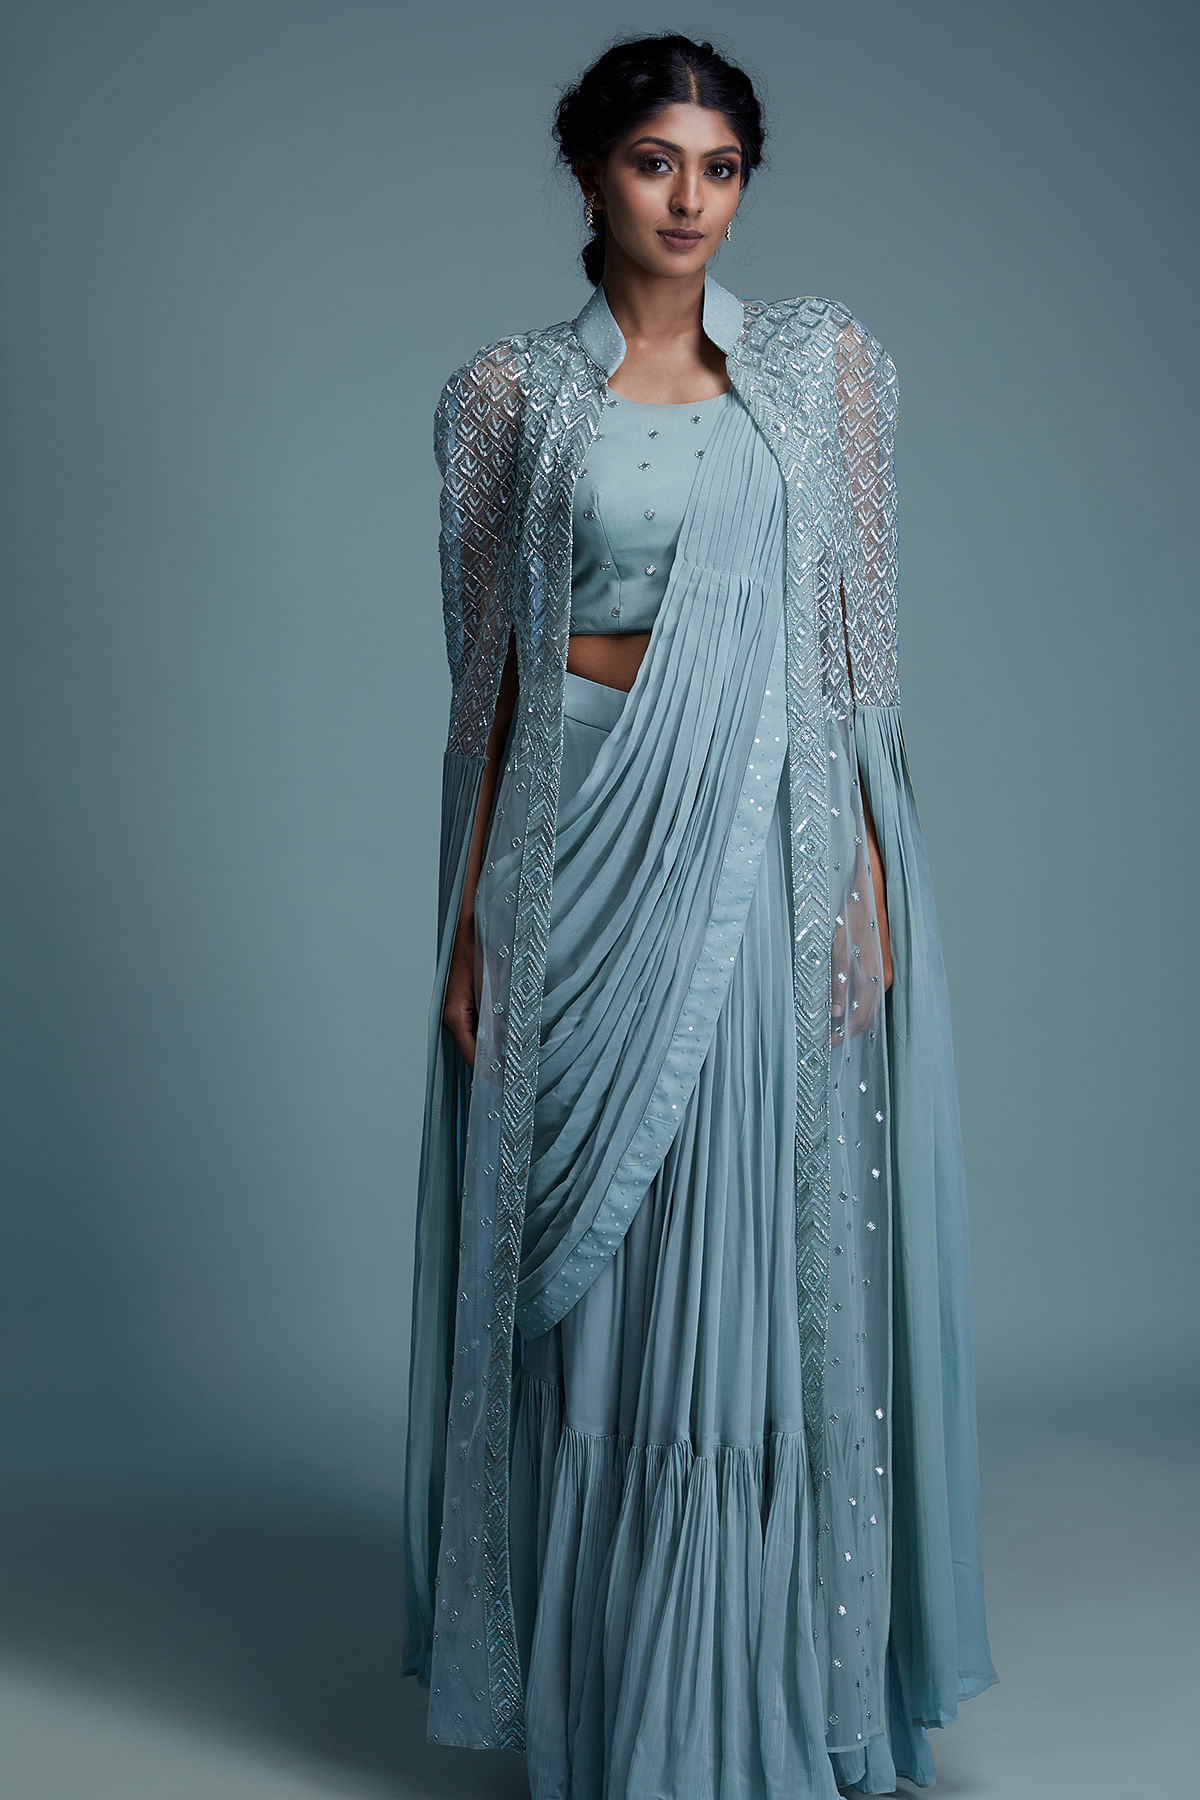 a captivating evening gown inspired by Kerala